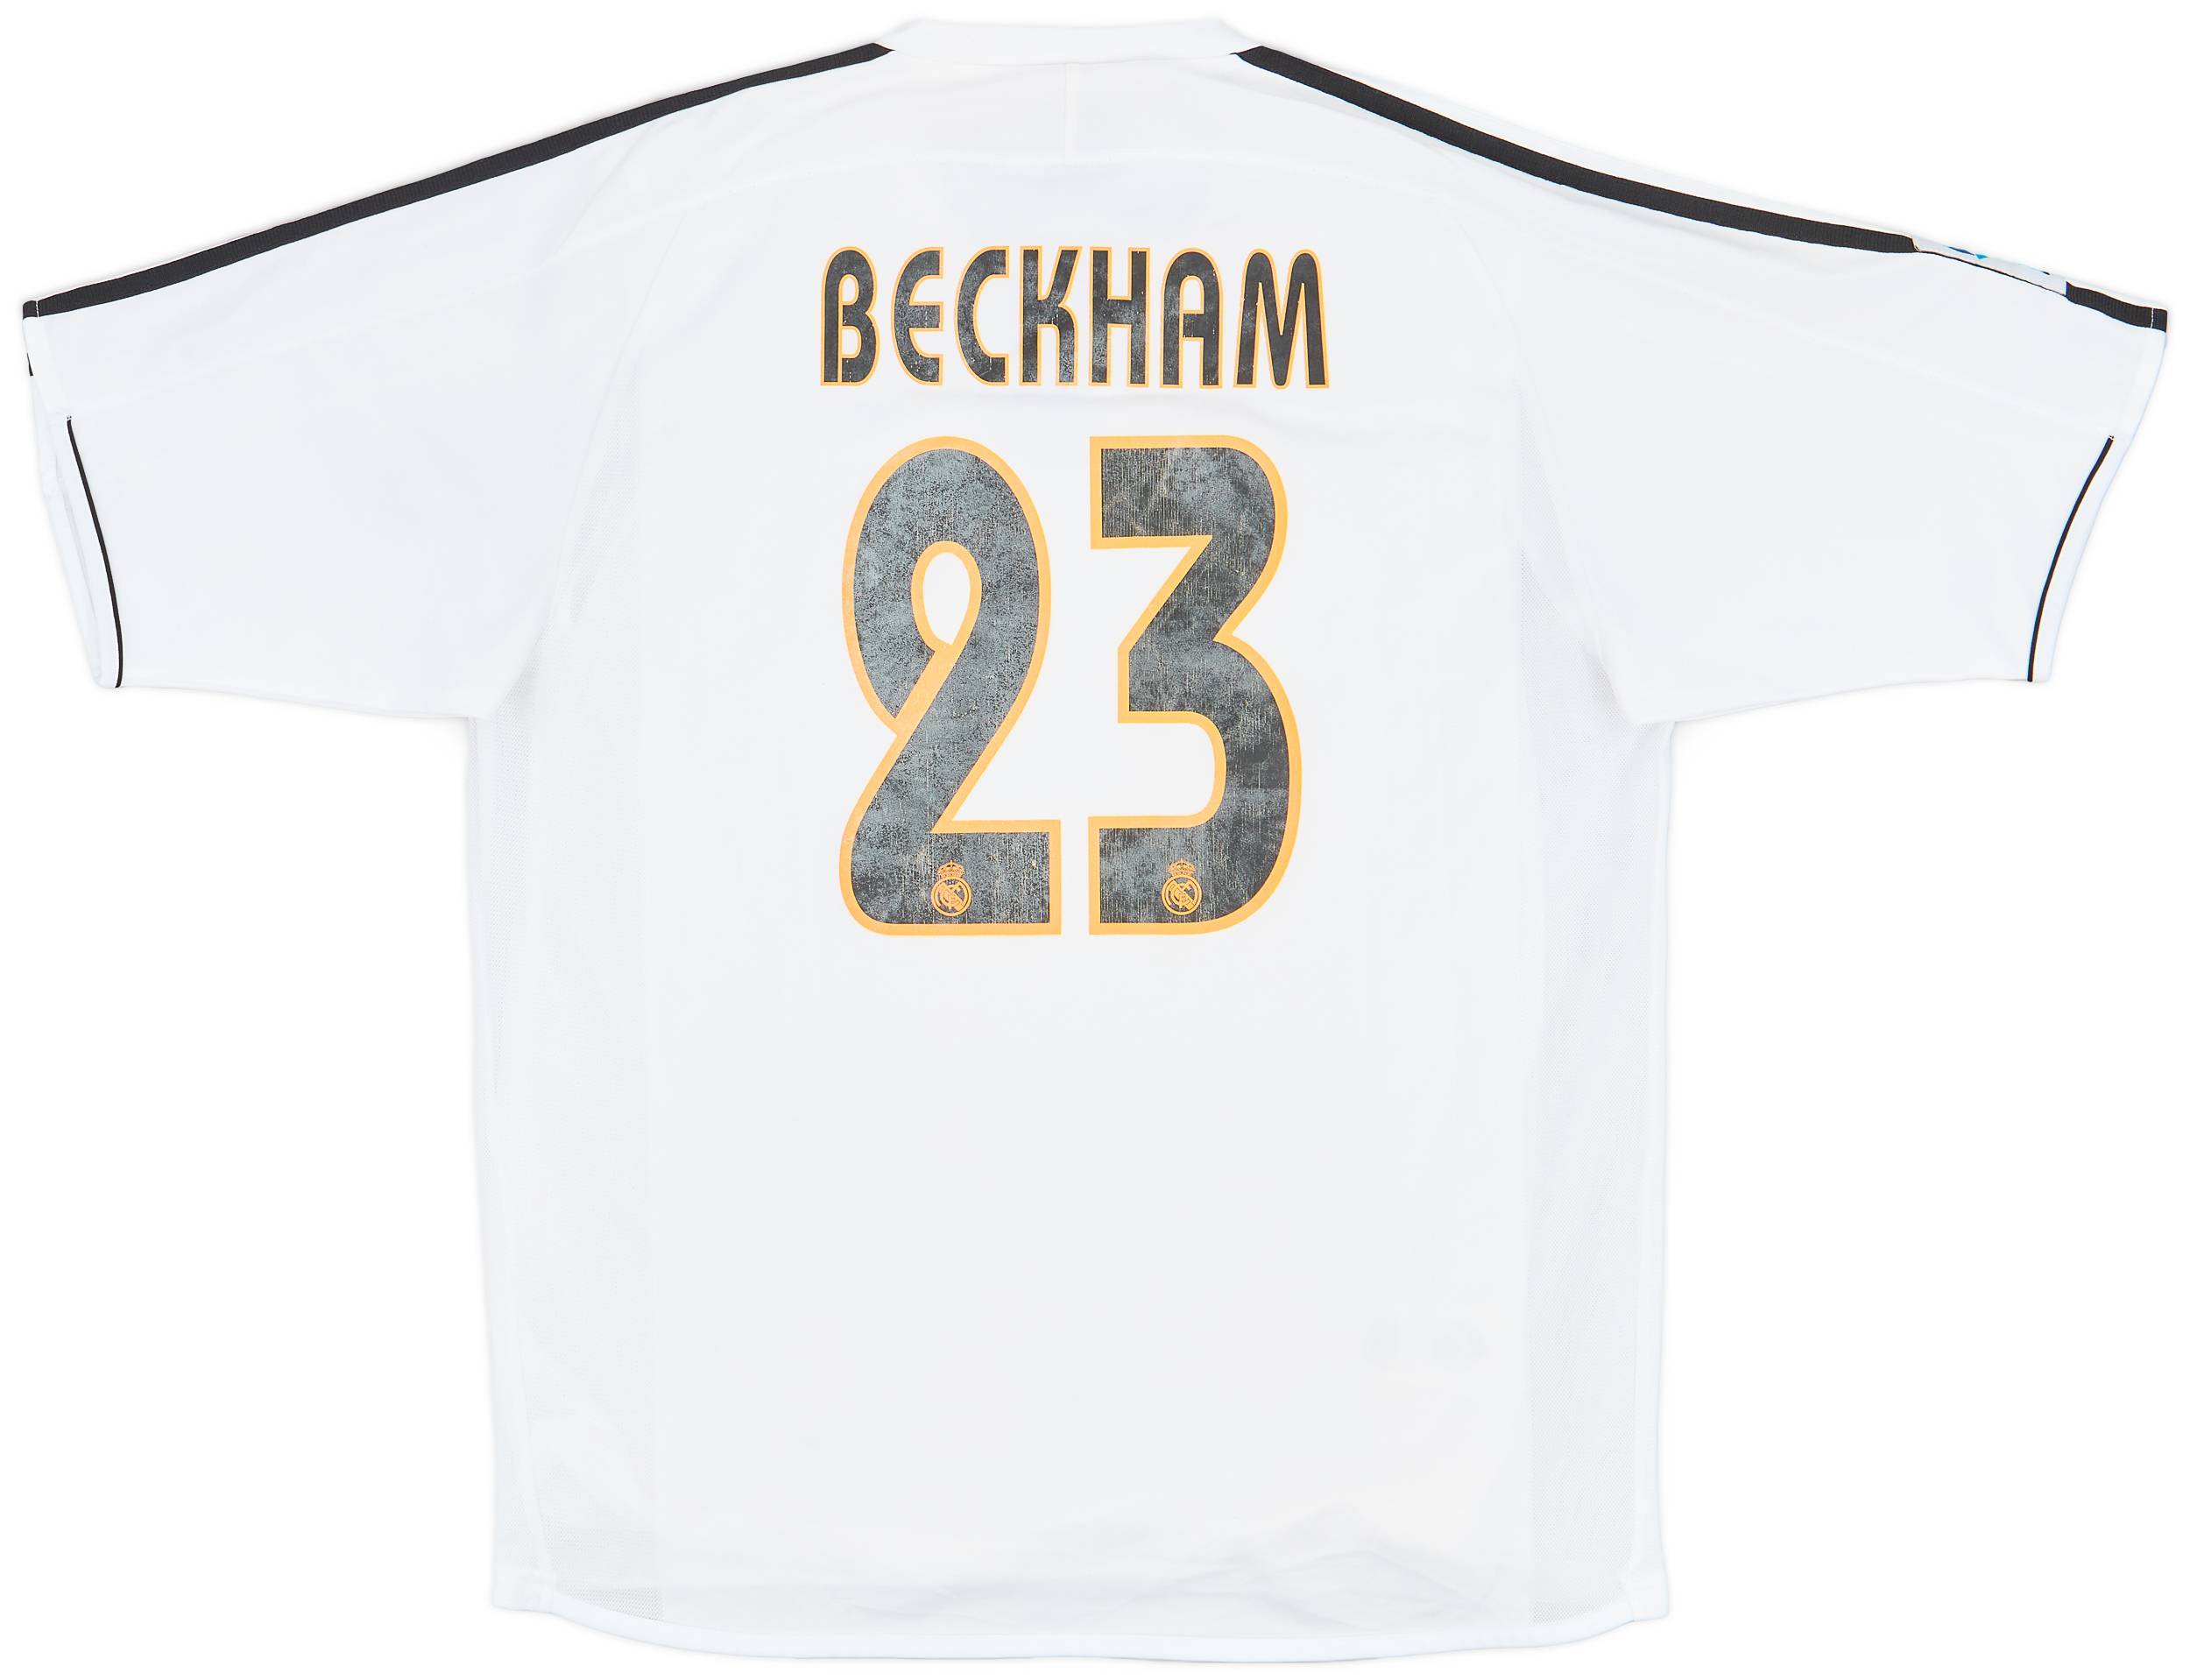 2003-04 Real Madrid Player Issue Home Shirt Beckham #23 - 6/10 - (M)